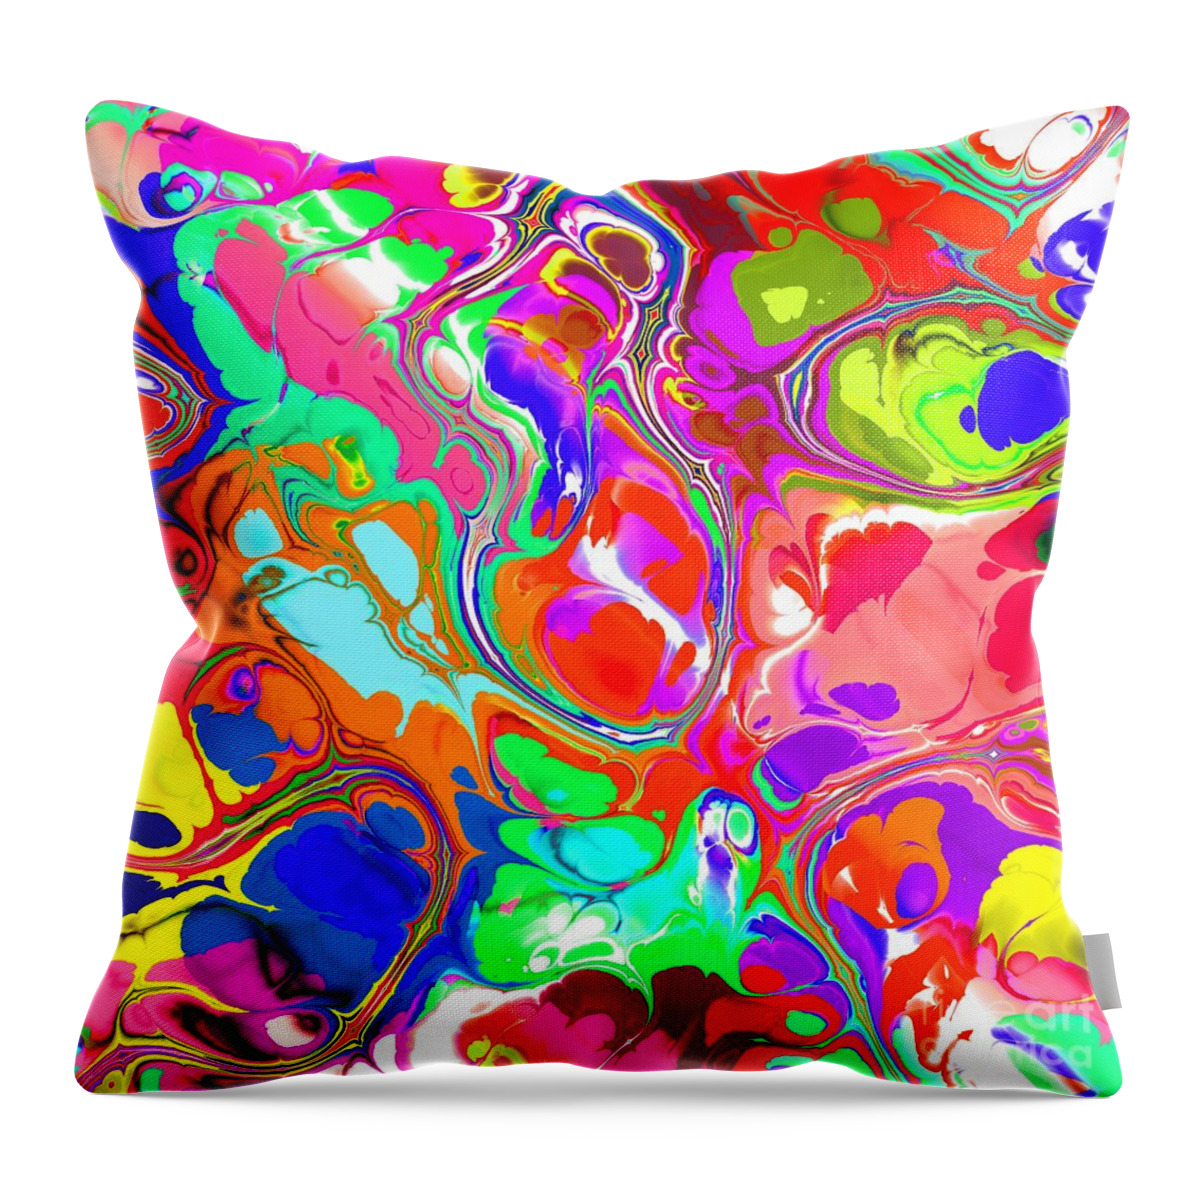 Colorful Throw Pillow featuring the digital art Marijan - Funky Artistic Colorful Abstract Marble Fluid Digital Art by Sambel Pedes